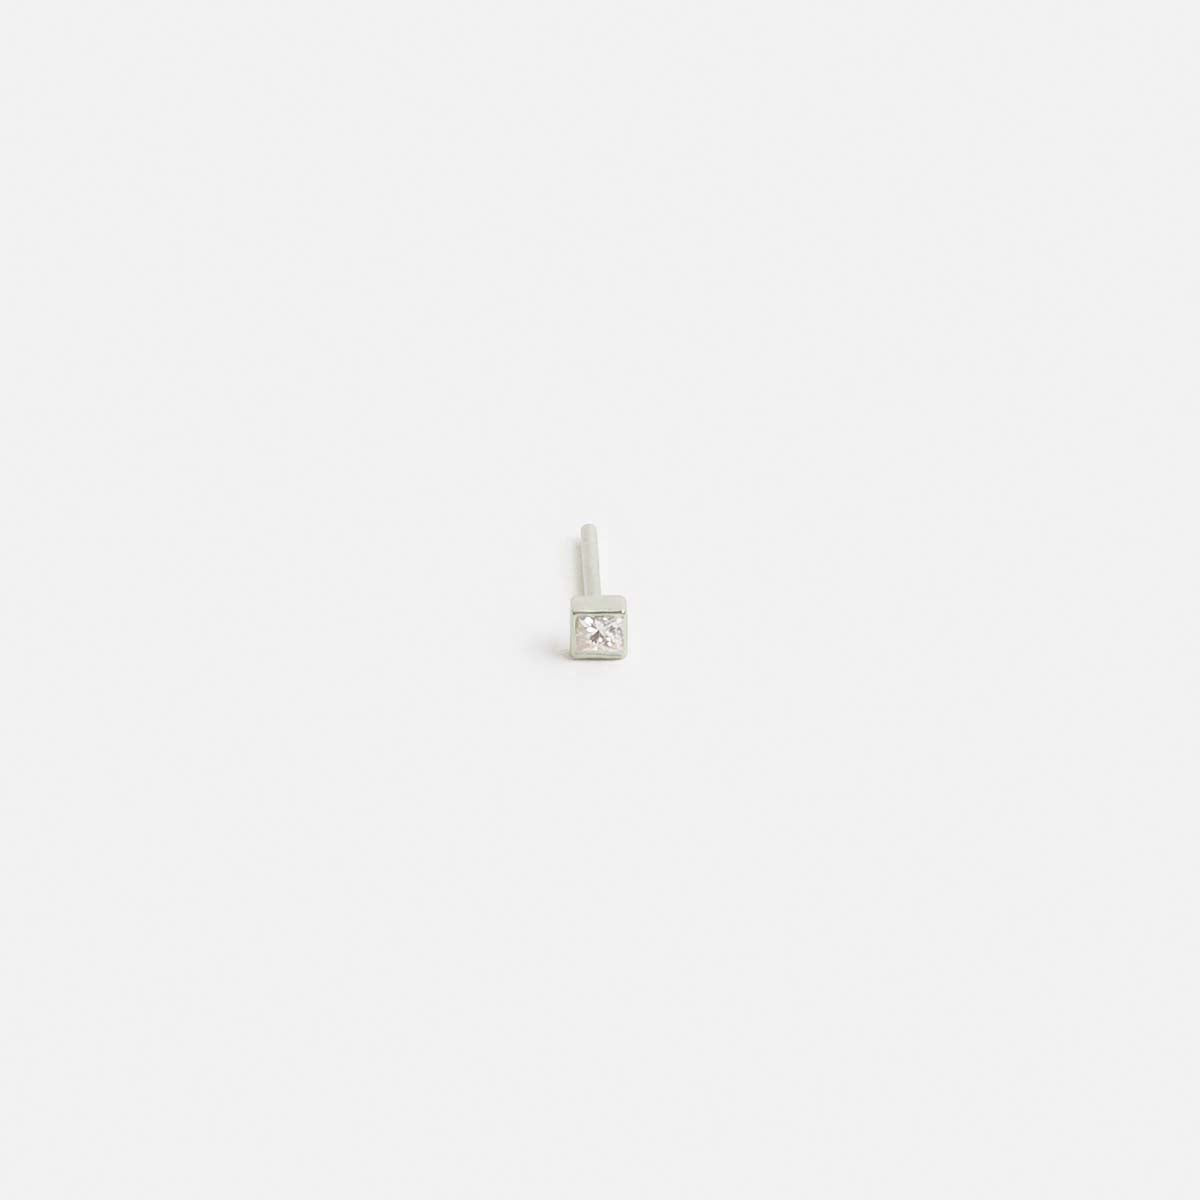 Small Minimal Ona Bar Stud in 14k White Gold set with White Diamond By SHW Fine Jewelry NYC